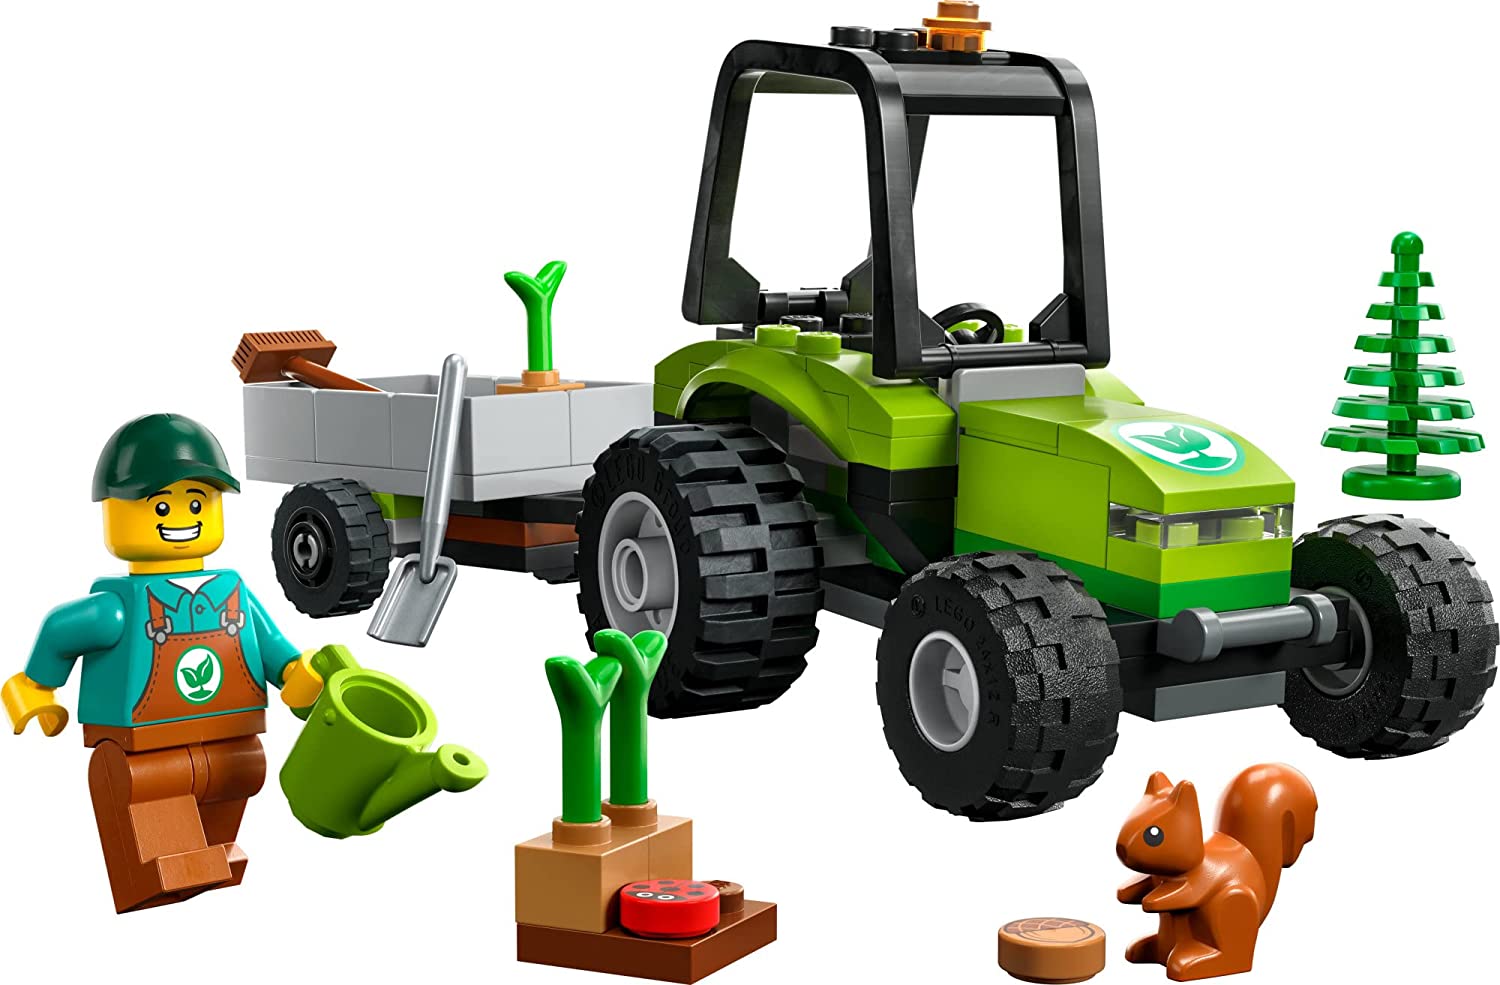 LEGO City Park Tractor Building Kit For Ages 5+